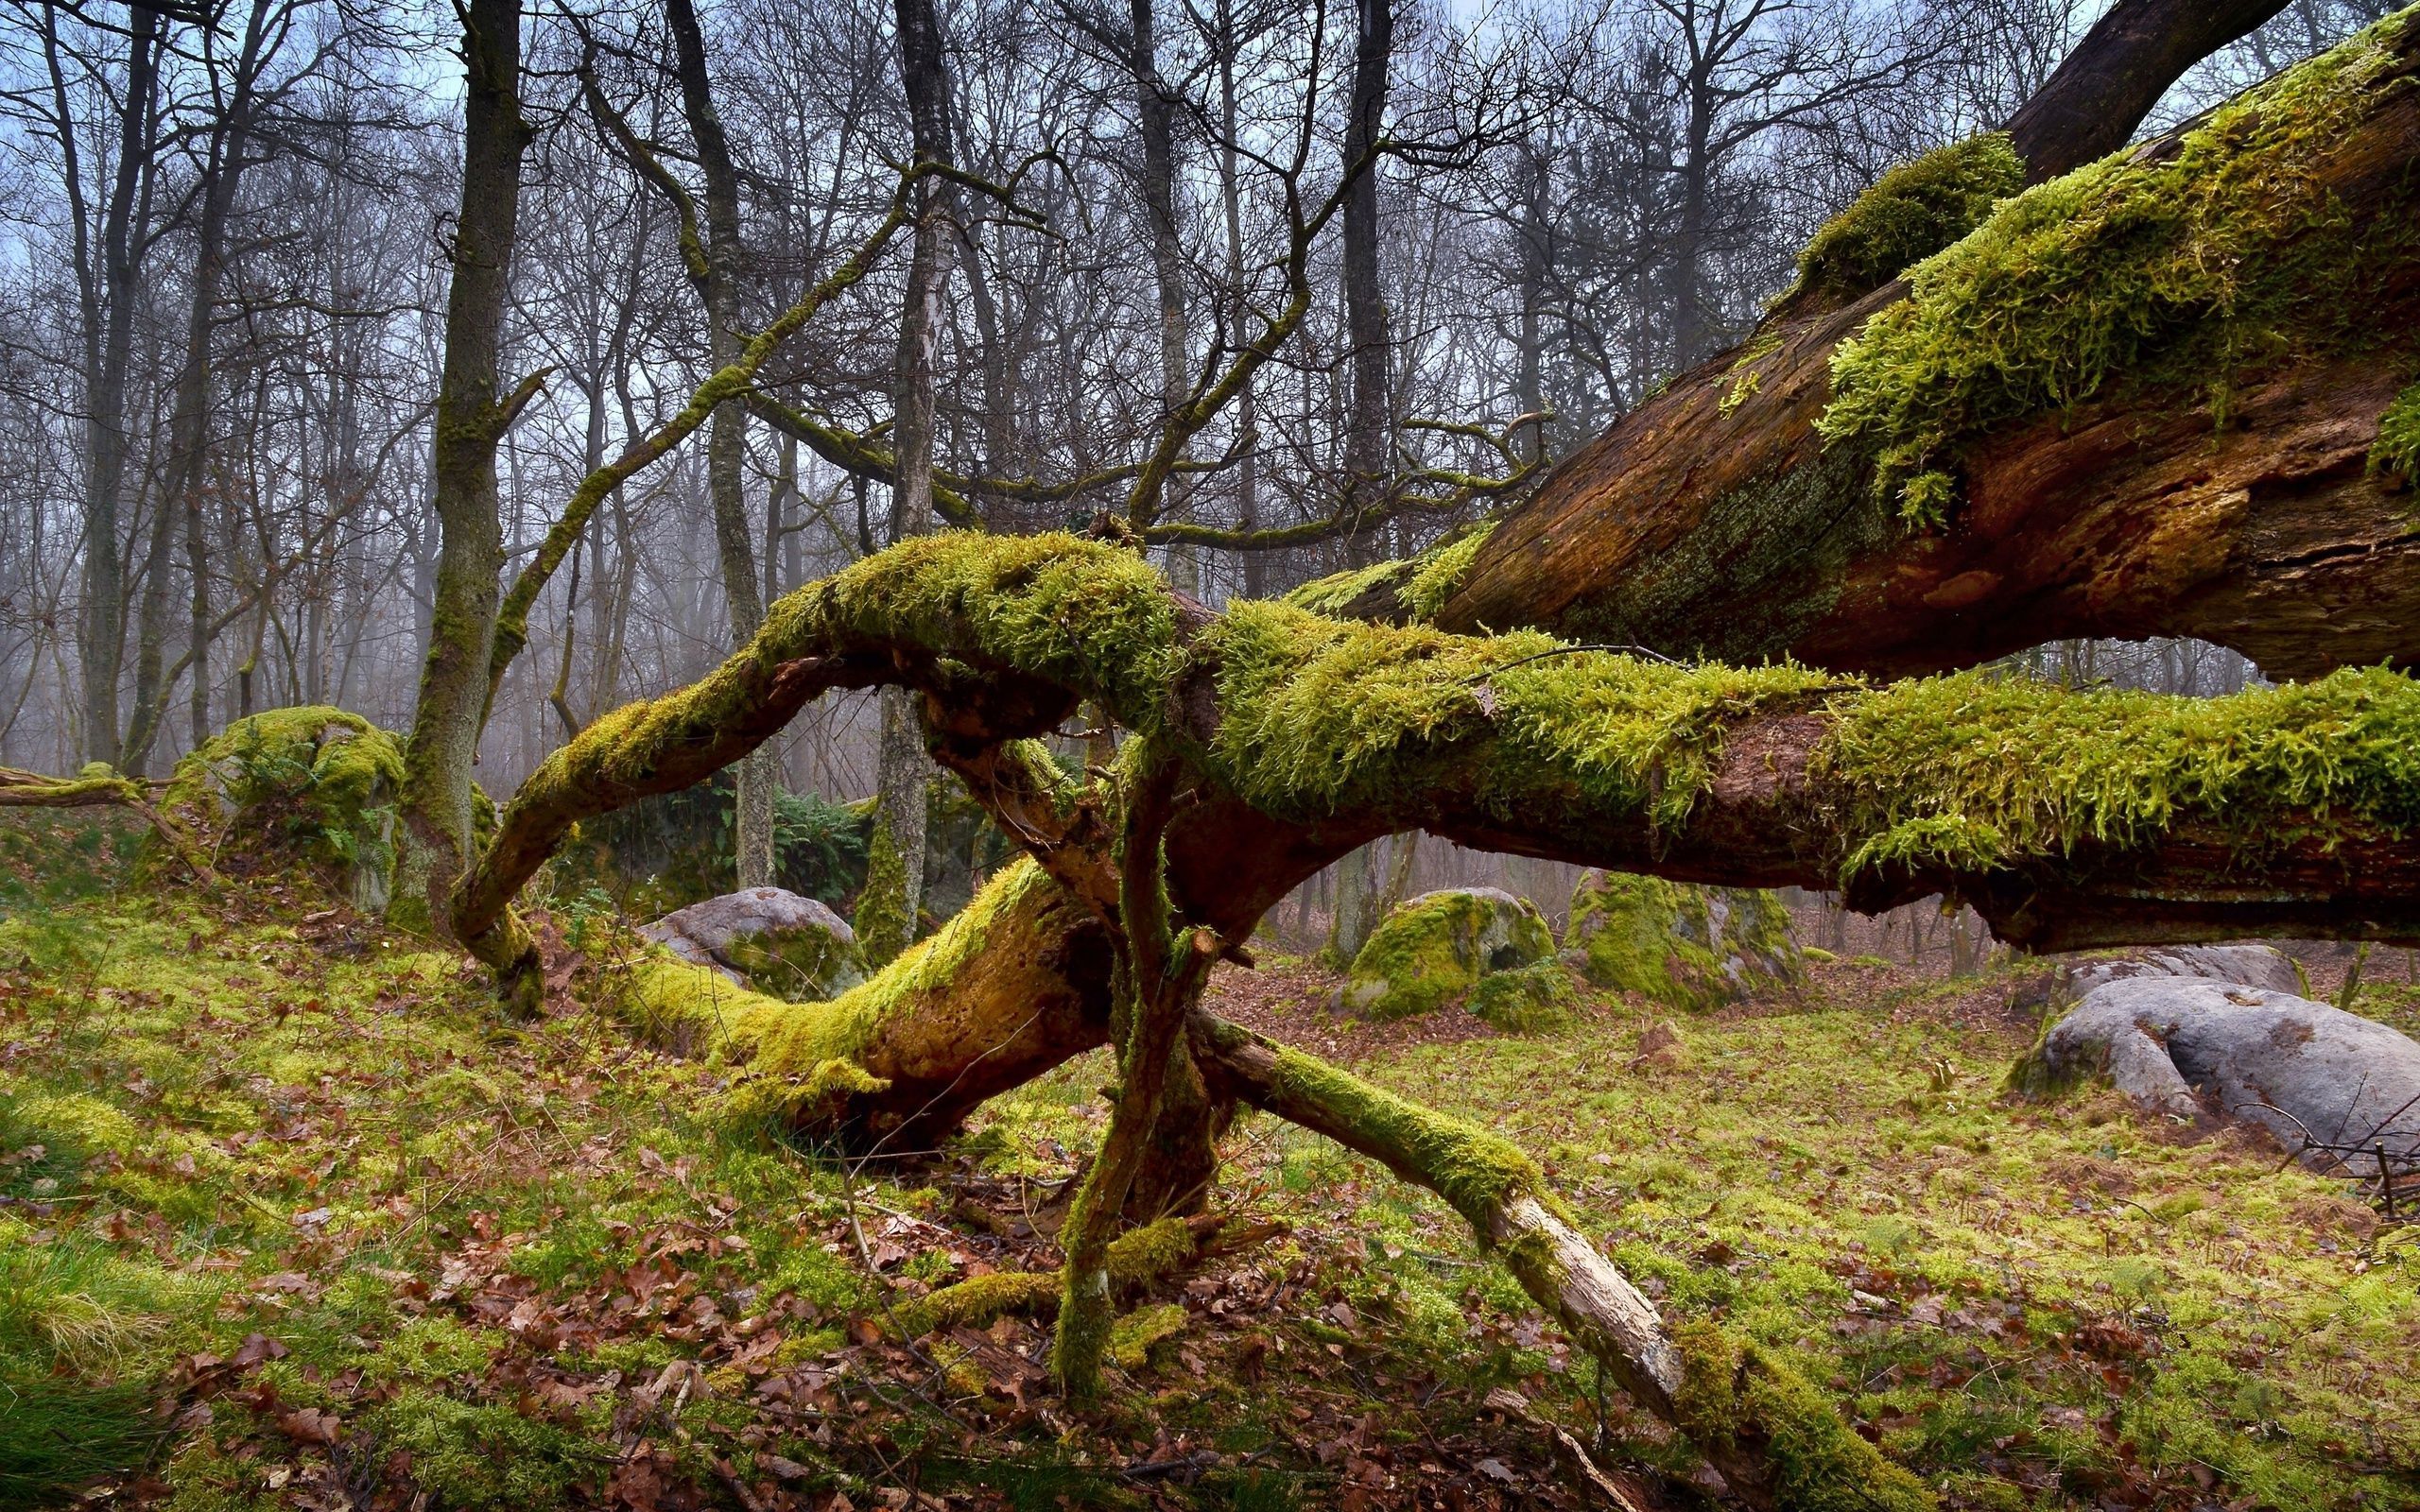 Mossy tree logs wallpaper - Nature wallpapers - #46695